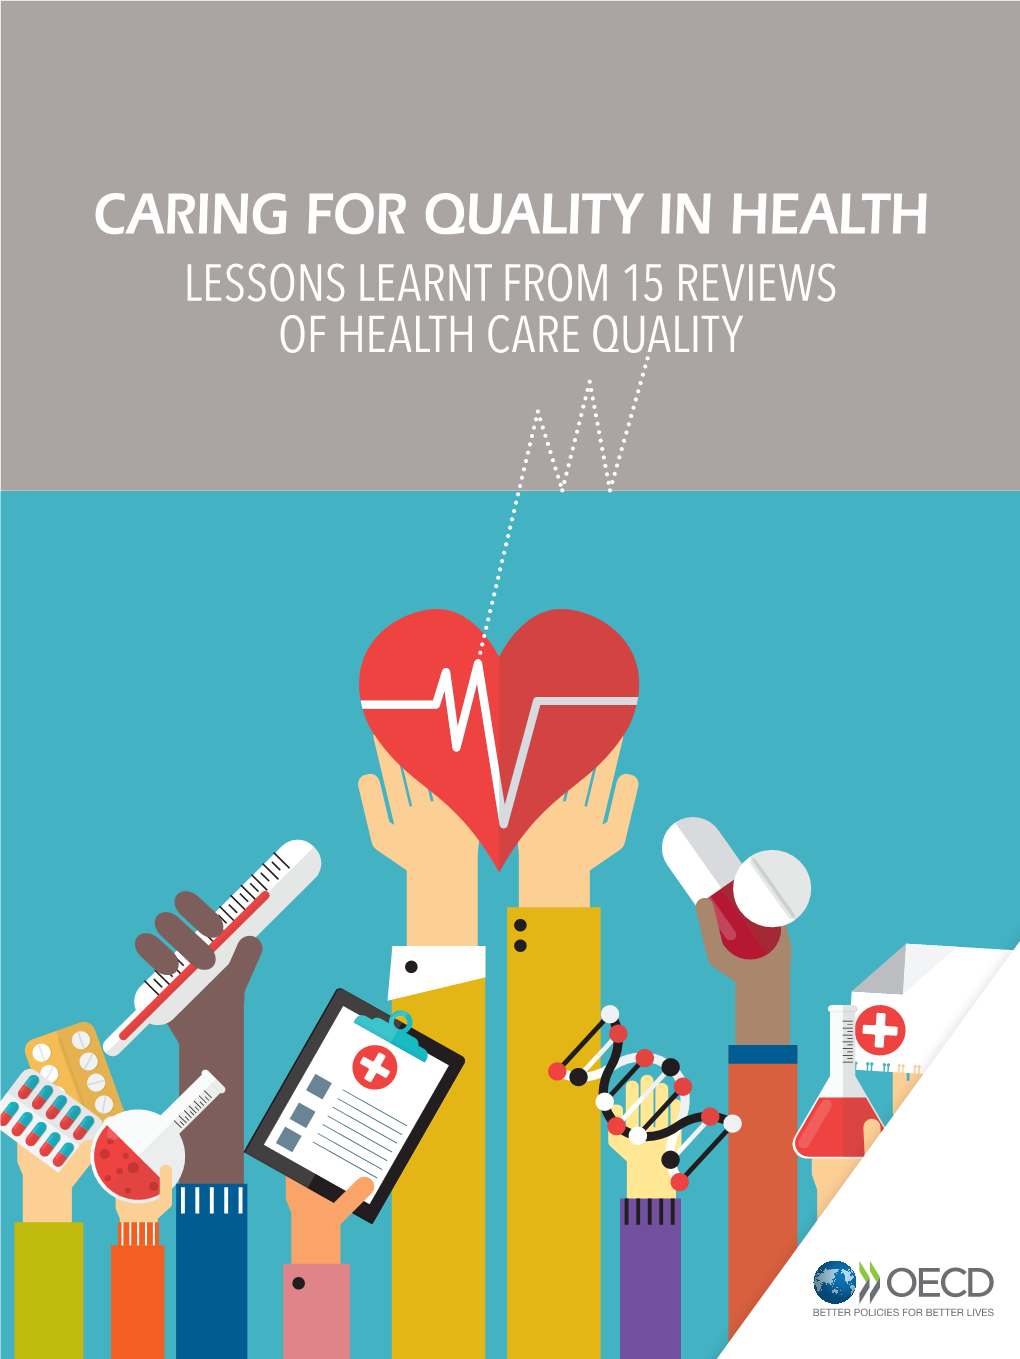 Caring for Quality in Health Lessons Learnt from 15 Reviews of Health Care Quality